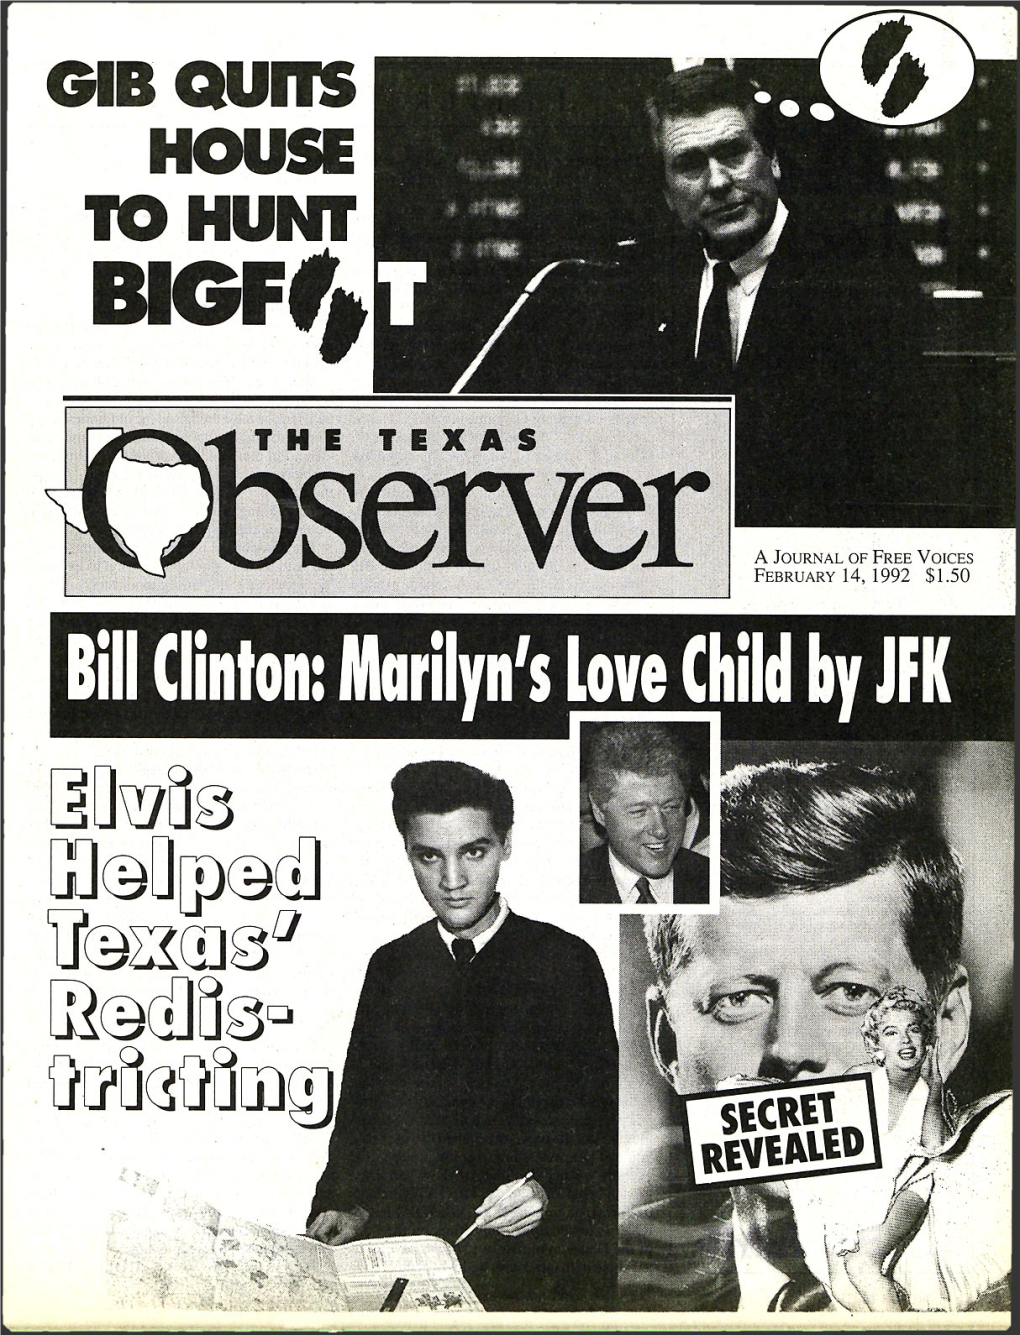 Marilyn's Love Child by JFK LETTER to READERS